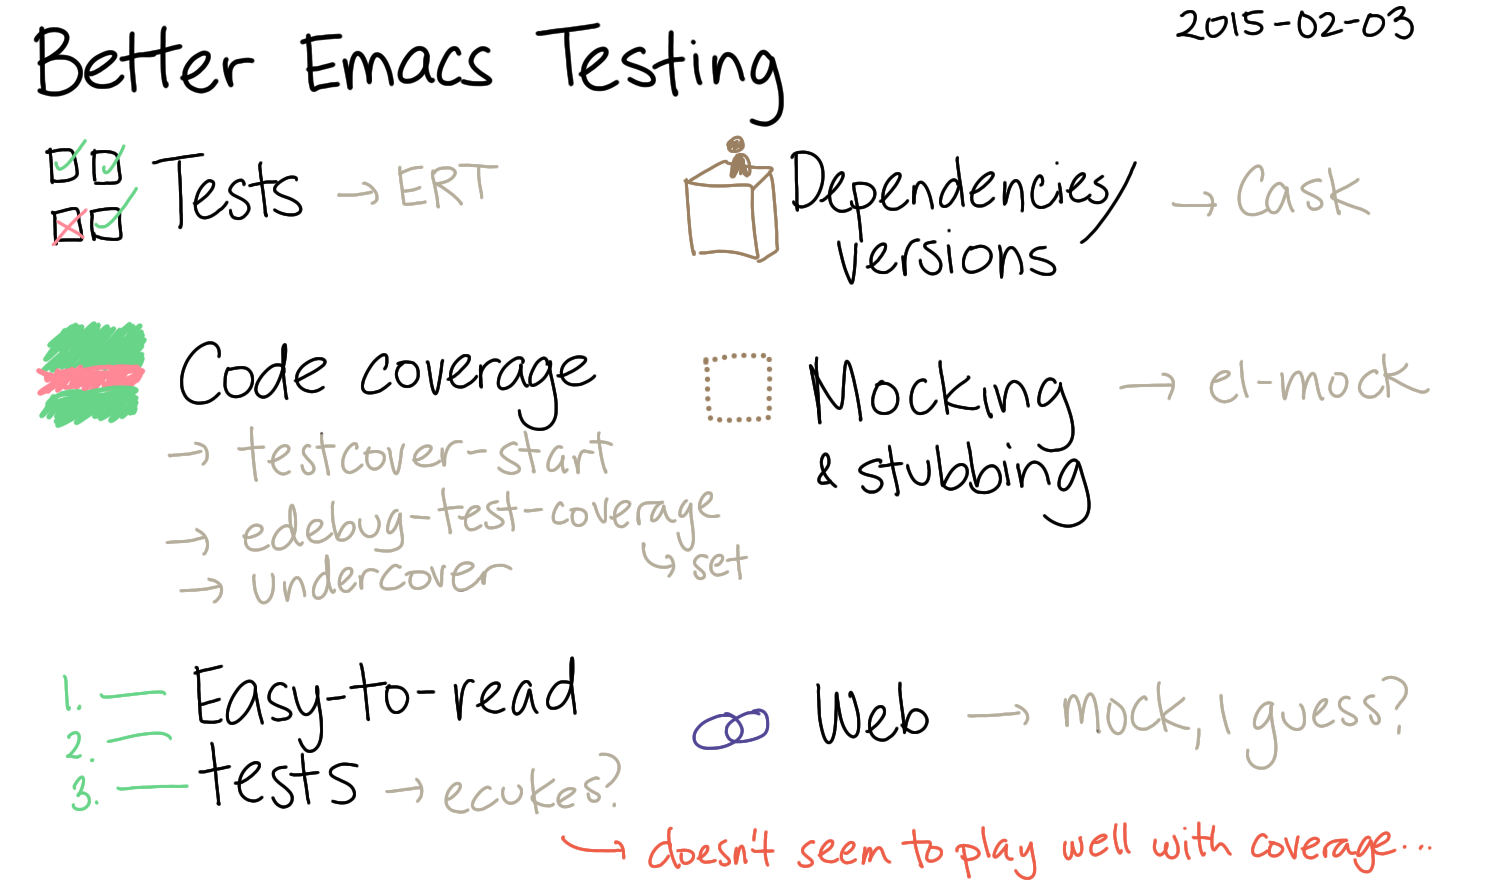 2015-02-03 Better Emacs Testing -- index card #testing #emacs